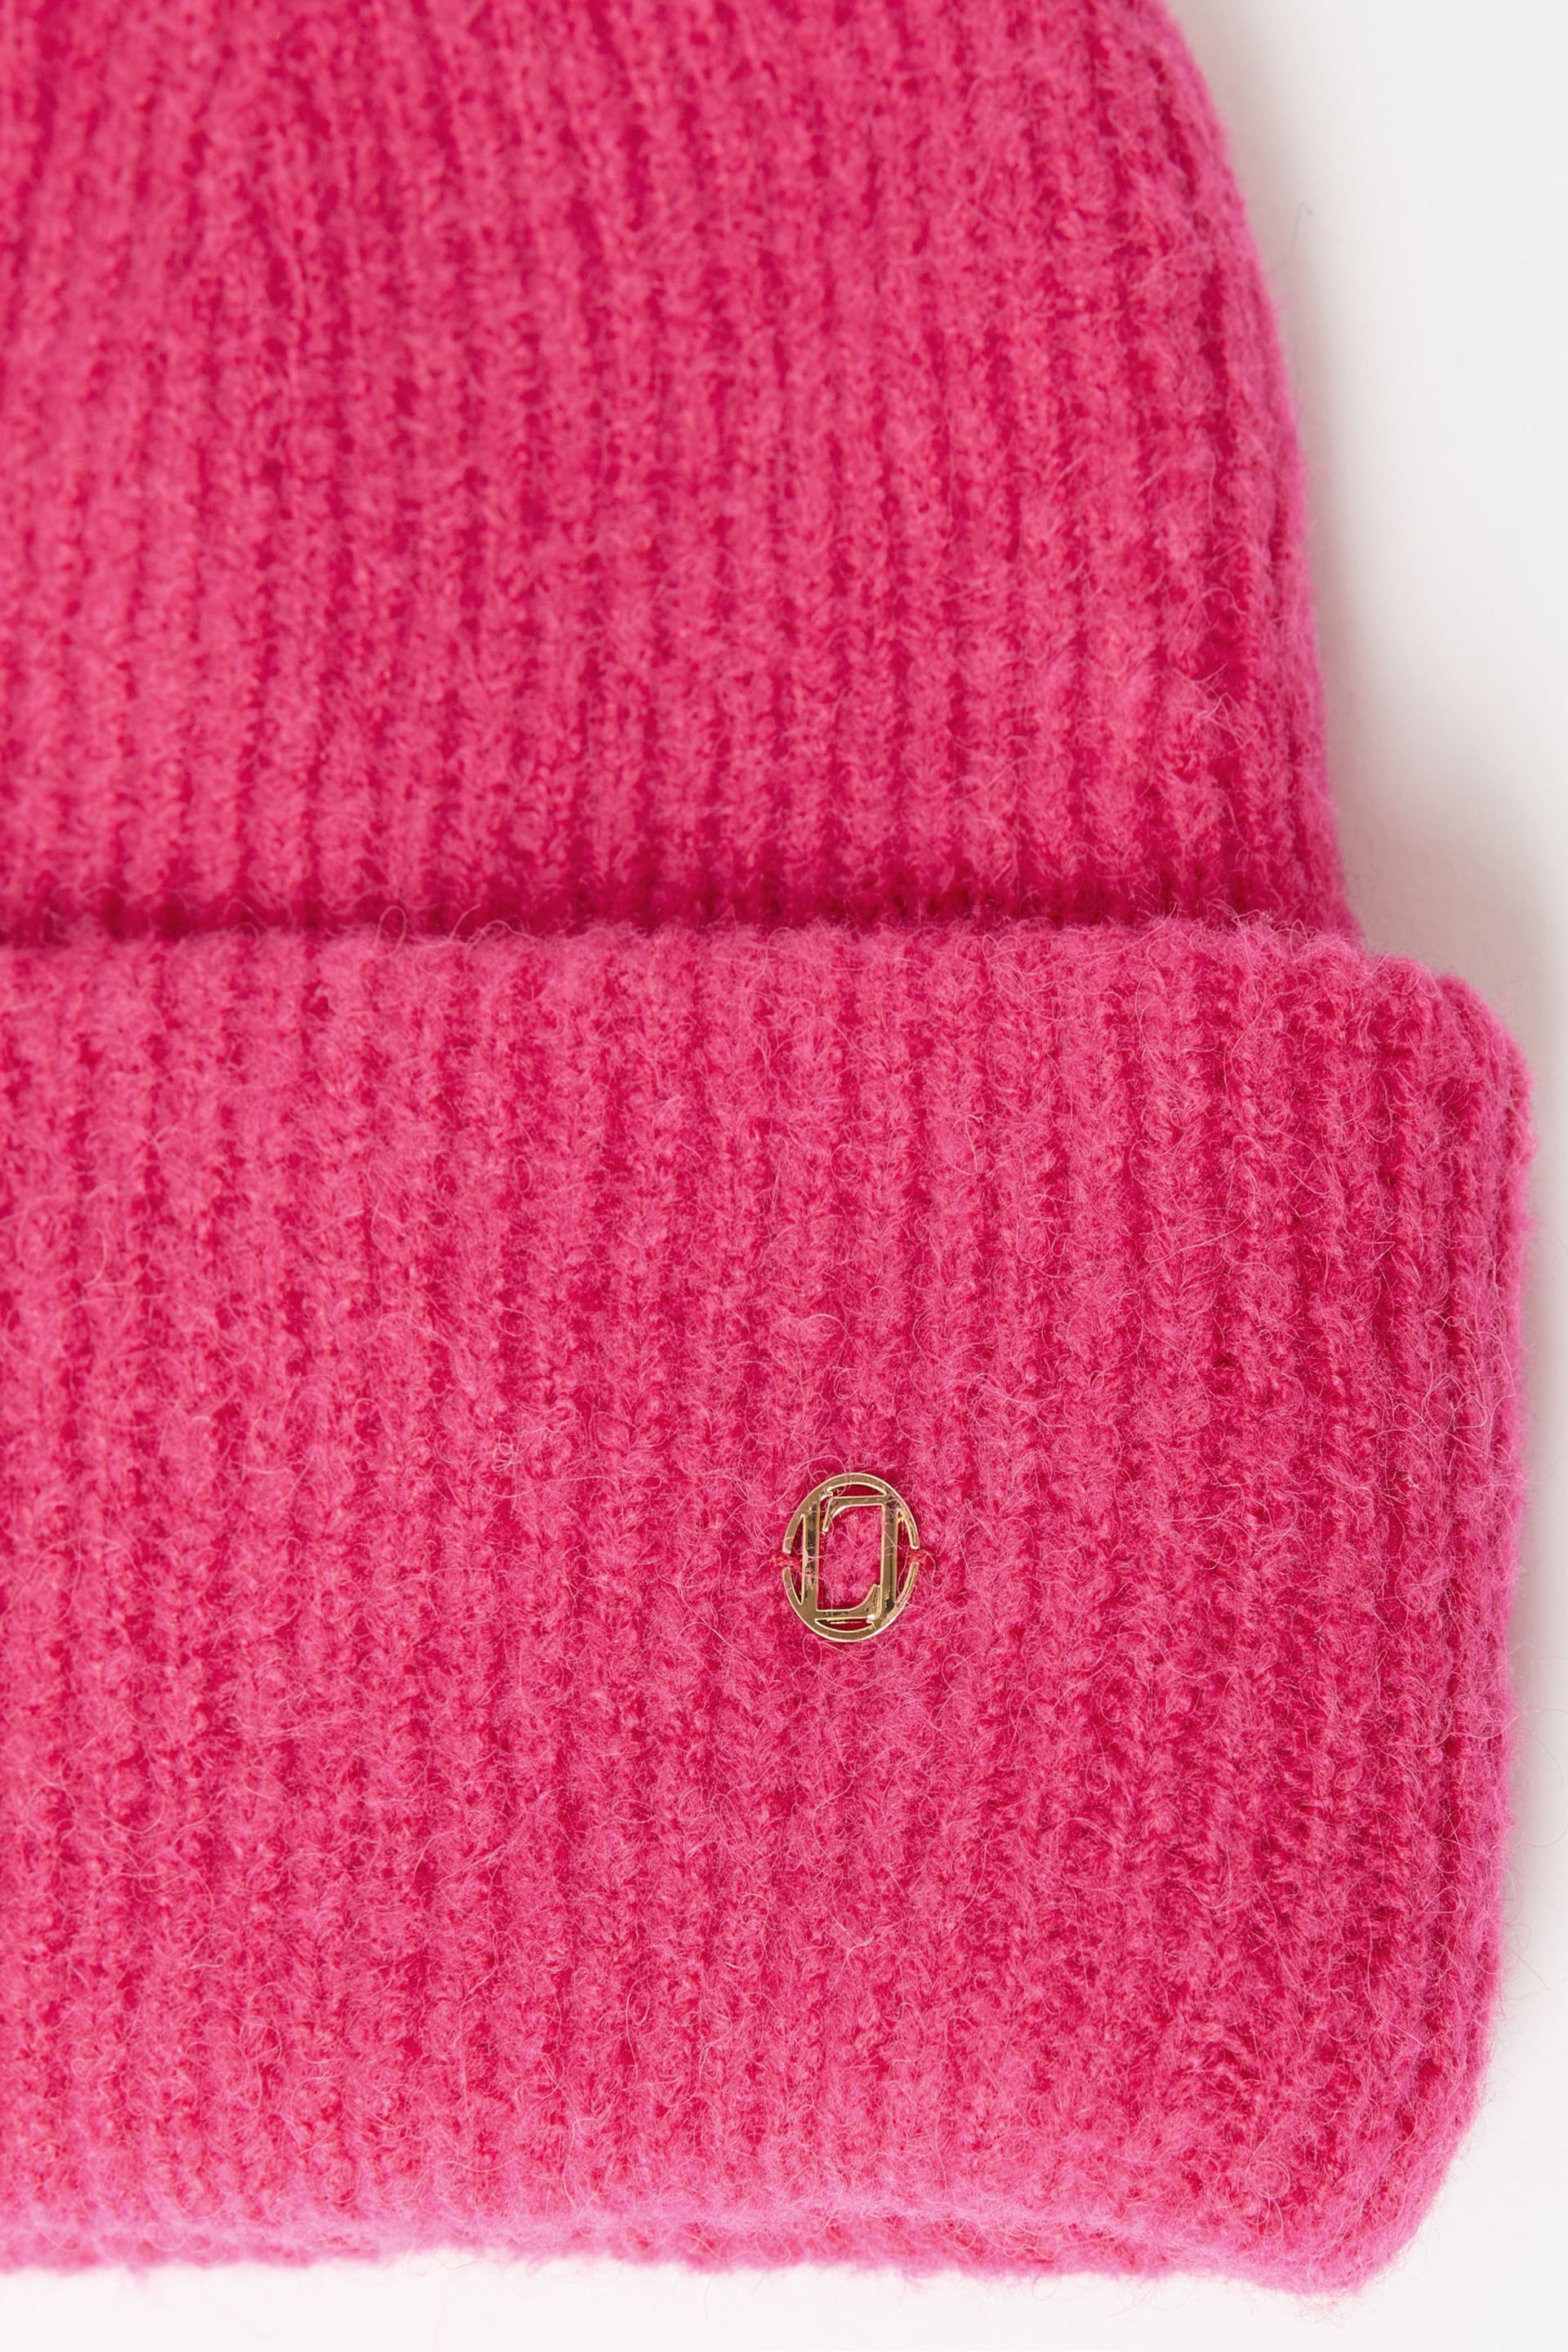 Lipsy Pink Chunky Knitted Turn Up Beanie Hat - Image 2 of 4